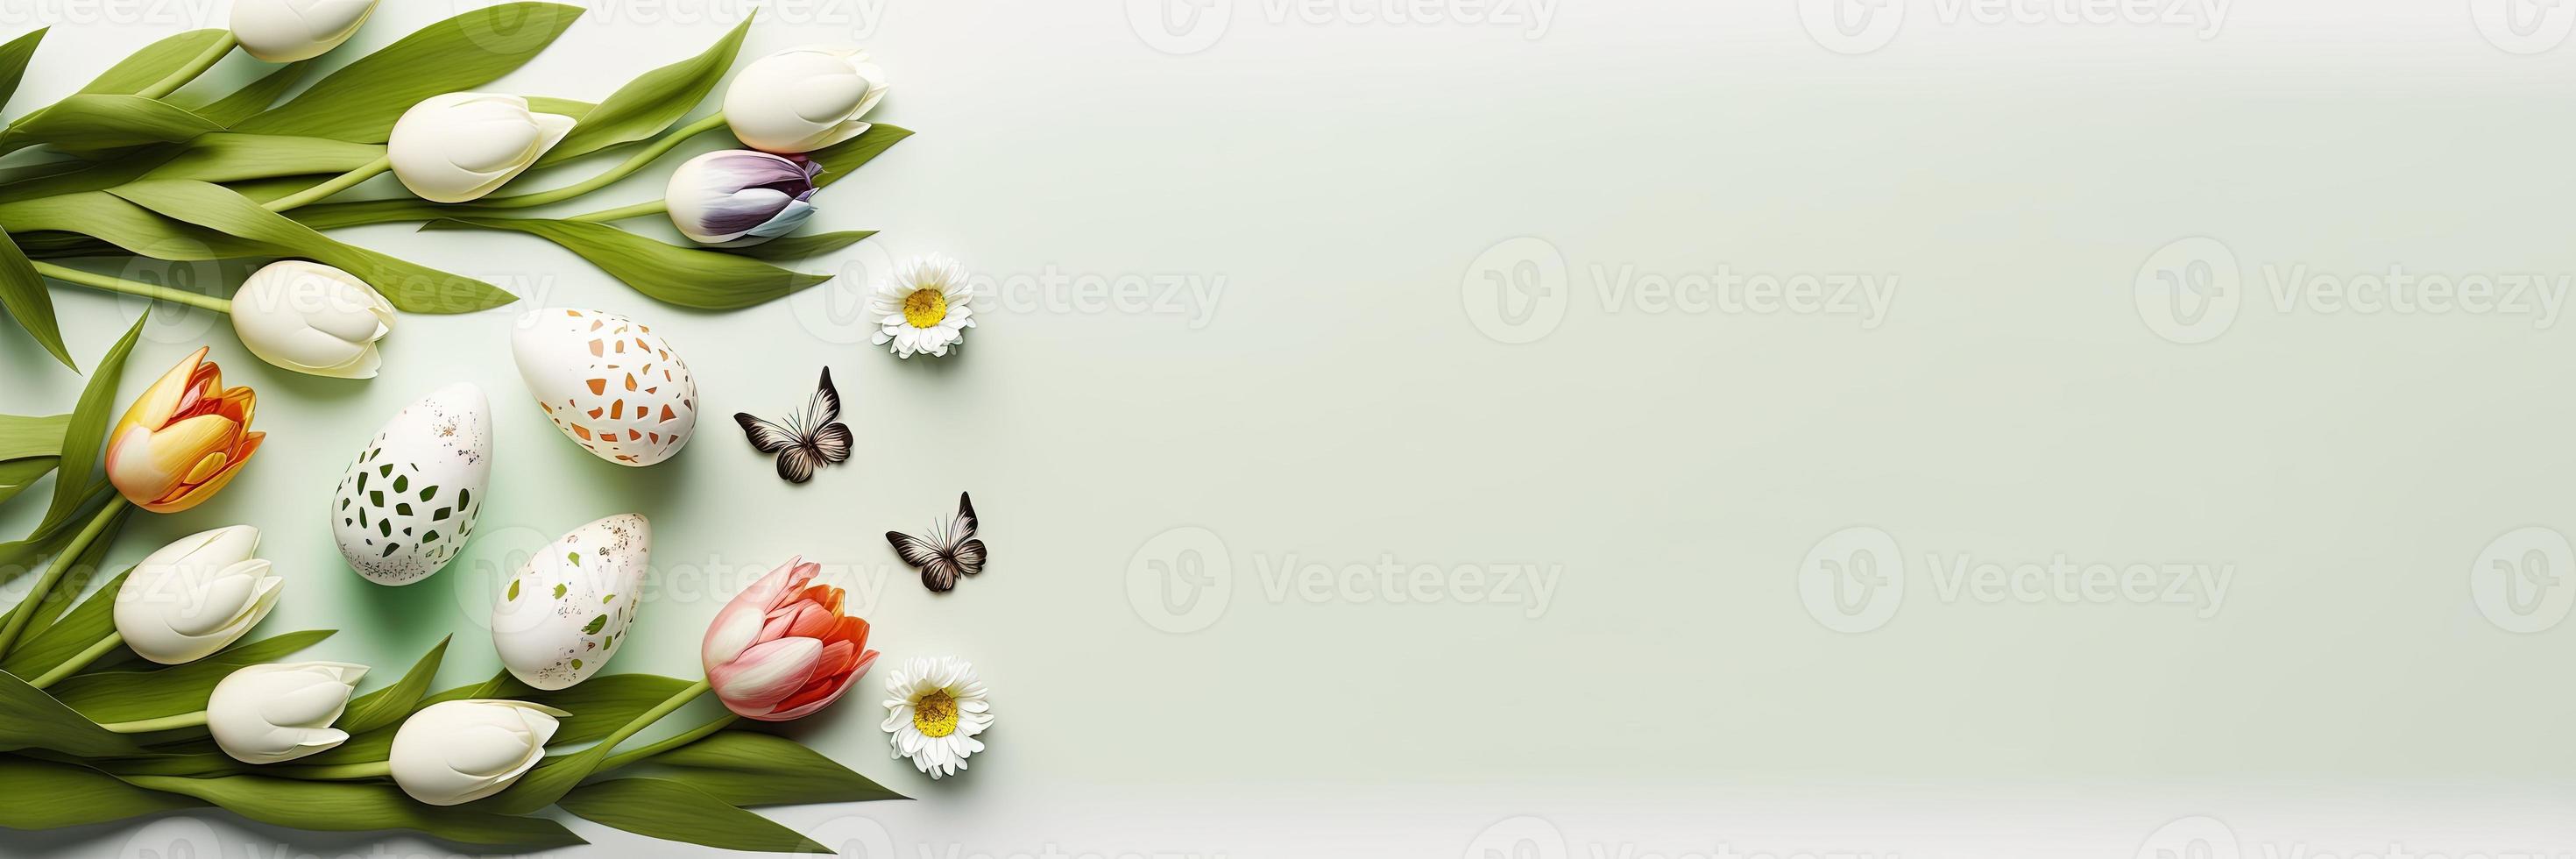 Decorated Tulips and Eggs On a Soft Green Background for An Easter Celebration Banner photo